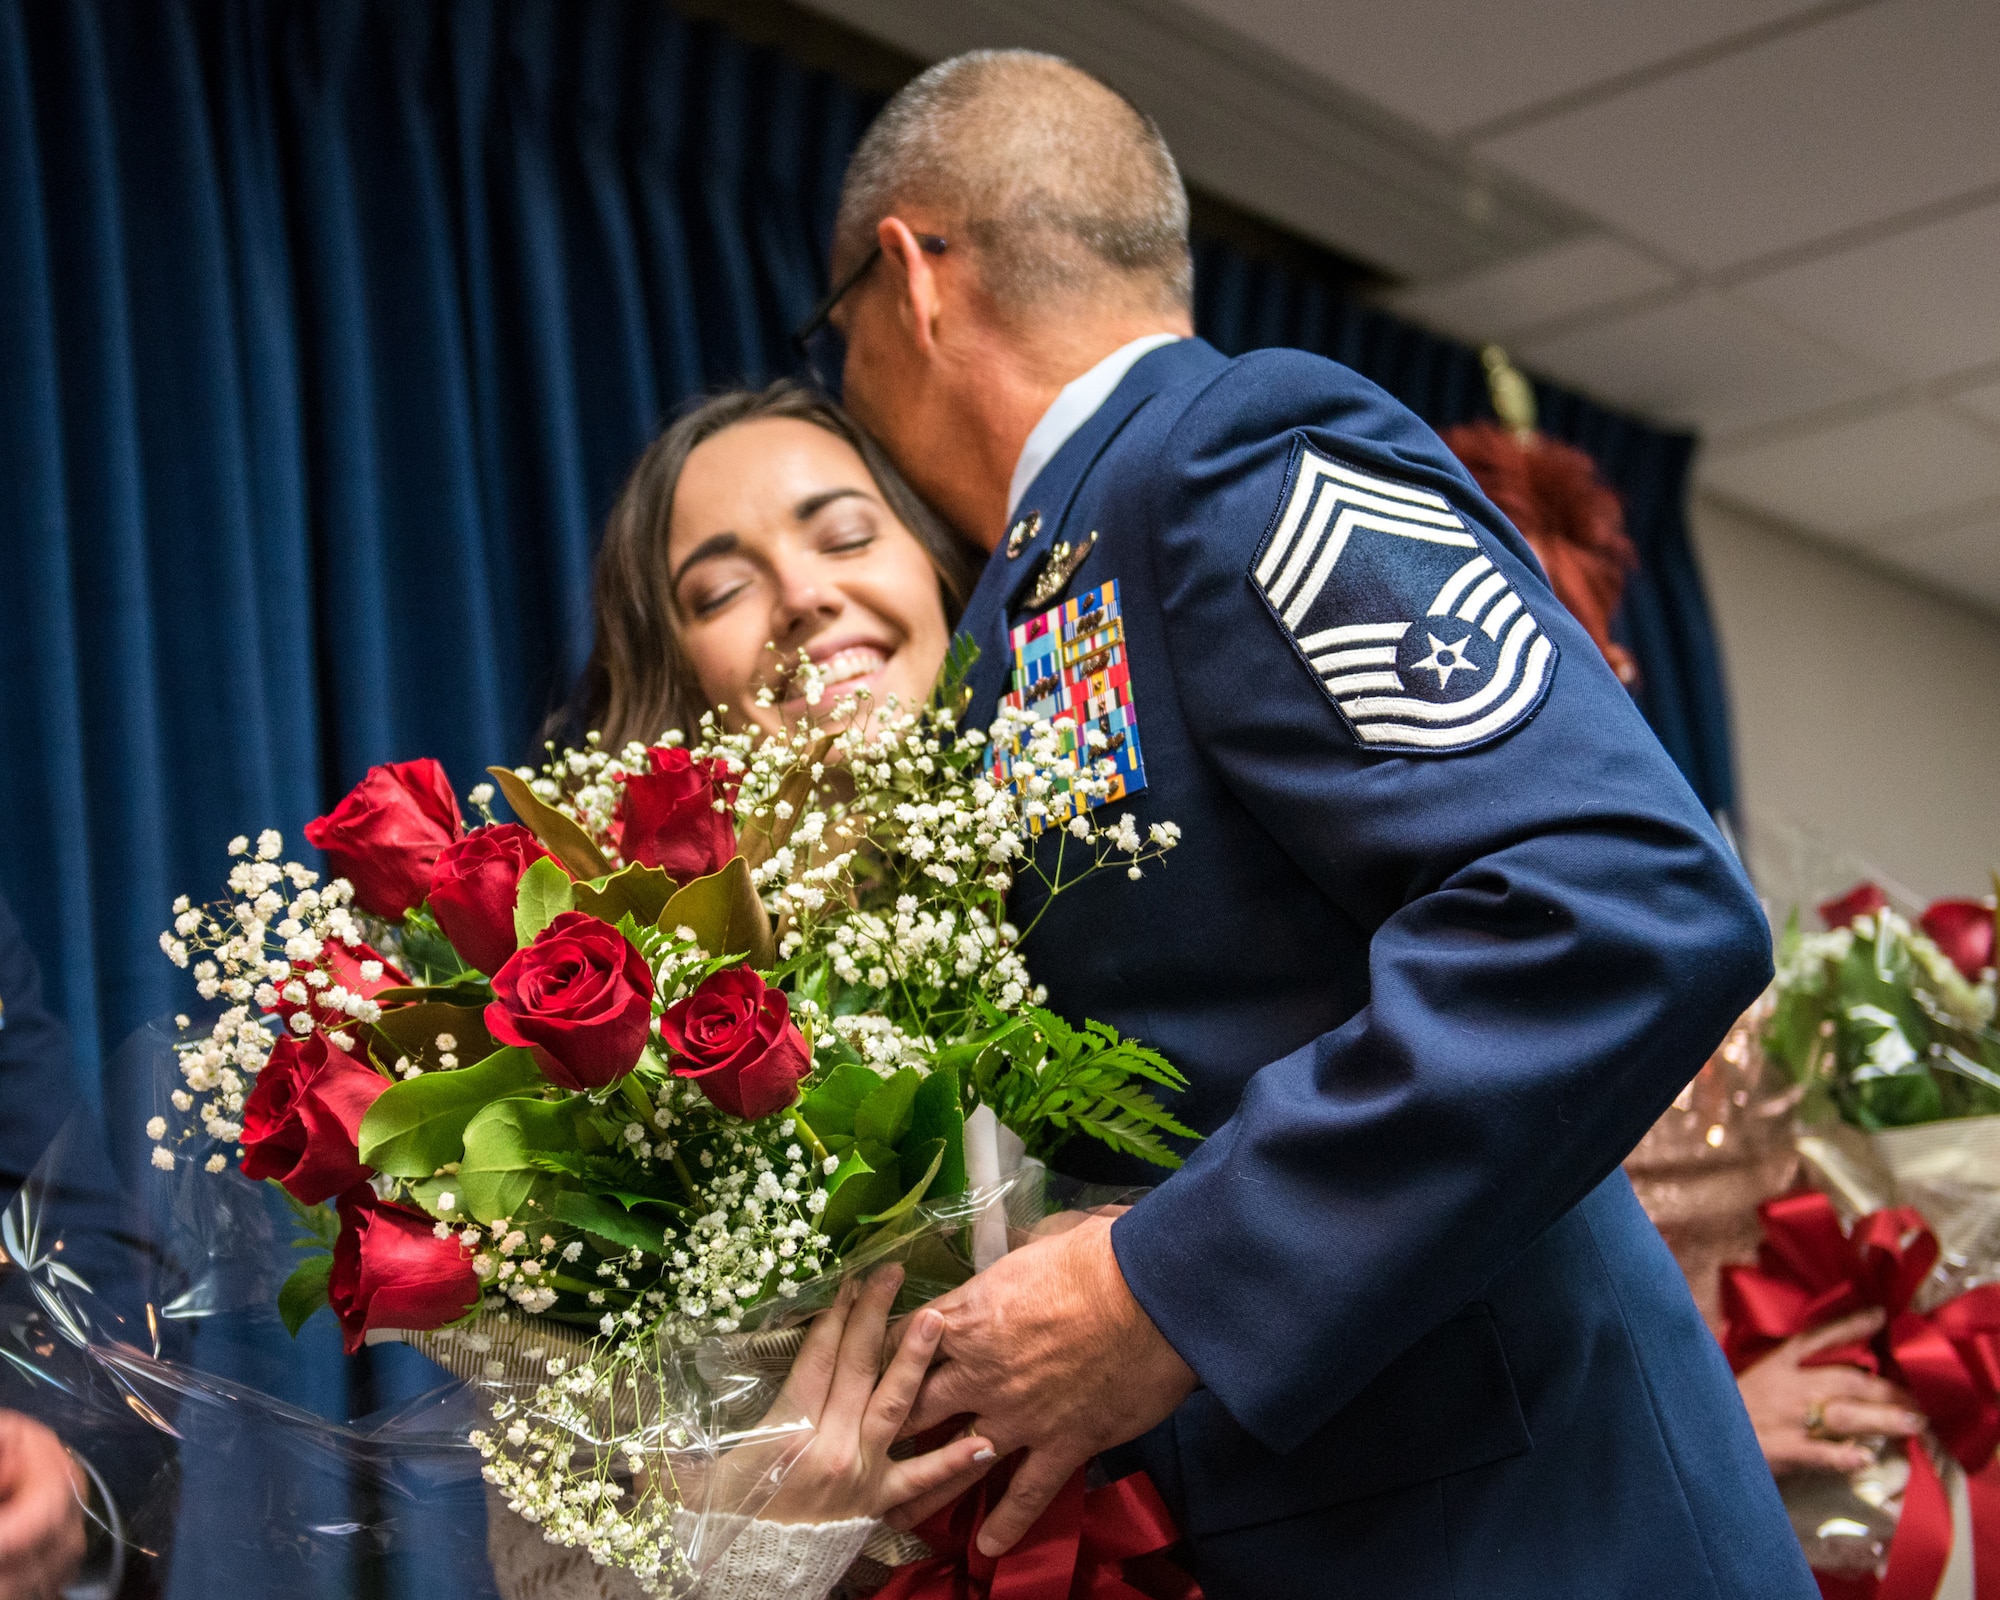 Chief Master Sgt. Jeffrey Brown, a loadmaster supervisor with the 165th Airlift Squadron, presents his daughter with a bouquet of roses during his ceremony at the Kentucky Air National Guard Base in Louisville, Ky., Dec. 7, 2019. (U.S. Air National Guard photo by Senior Airman Chloe Ochs)